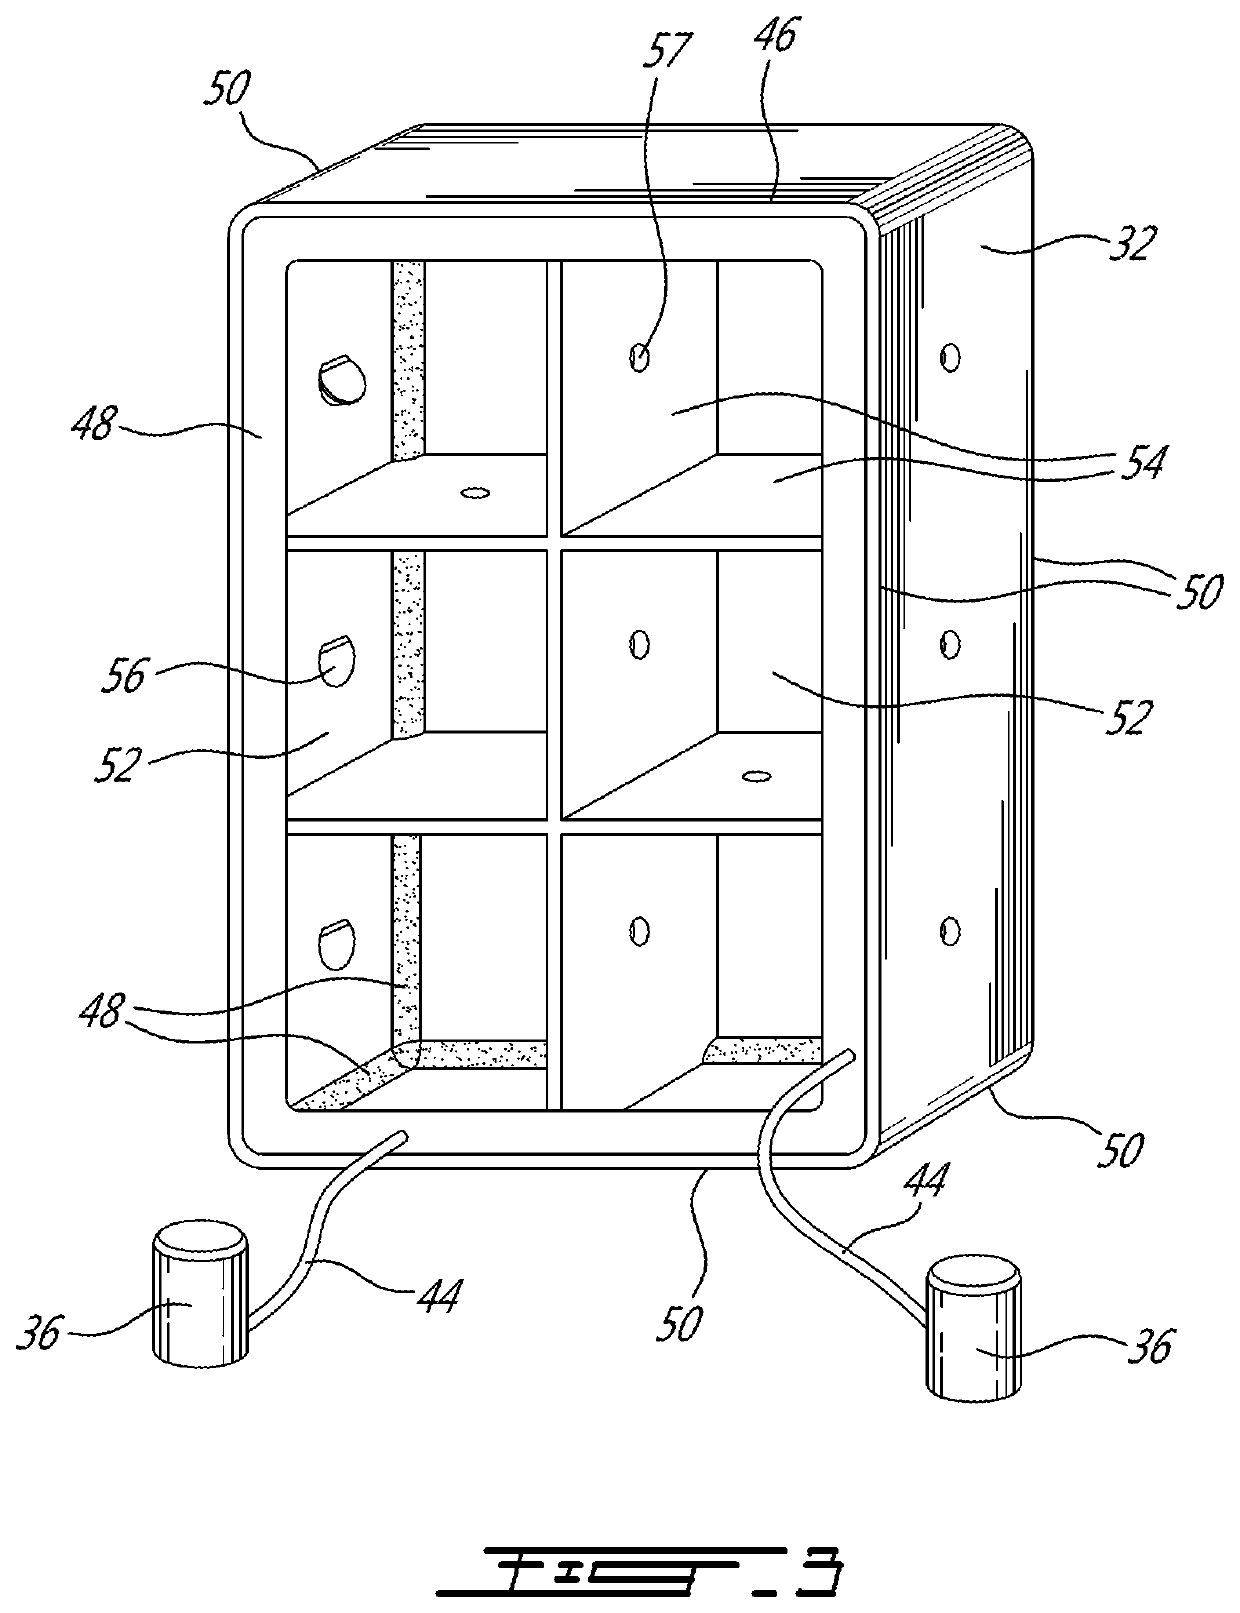 External airbag assembly for a rail vehicle